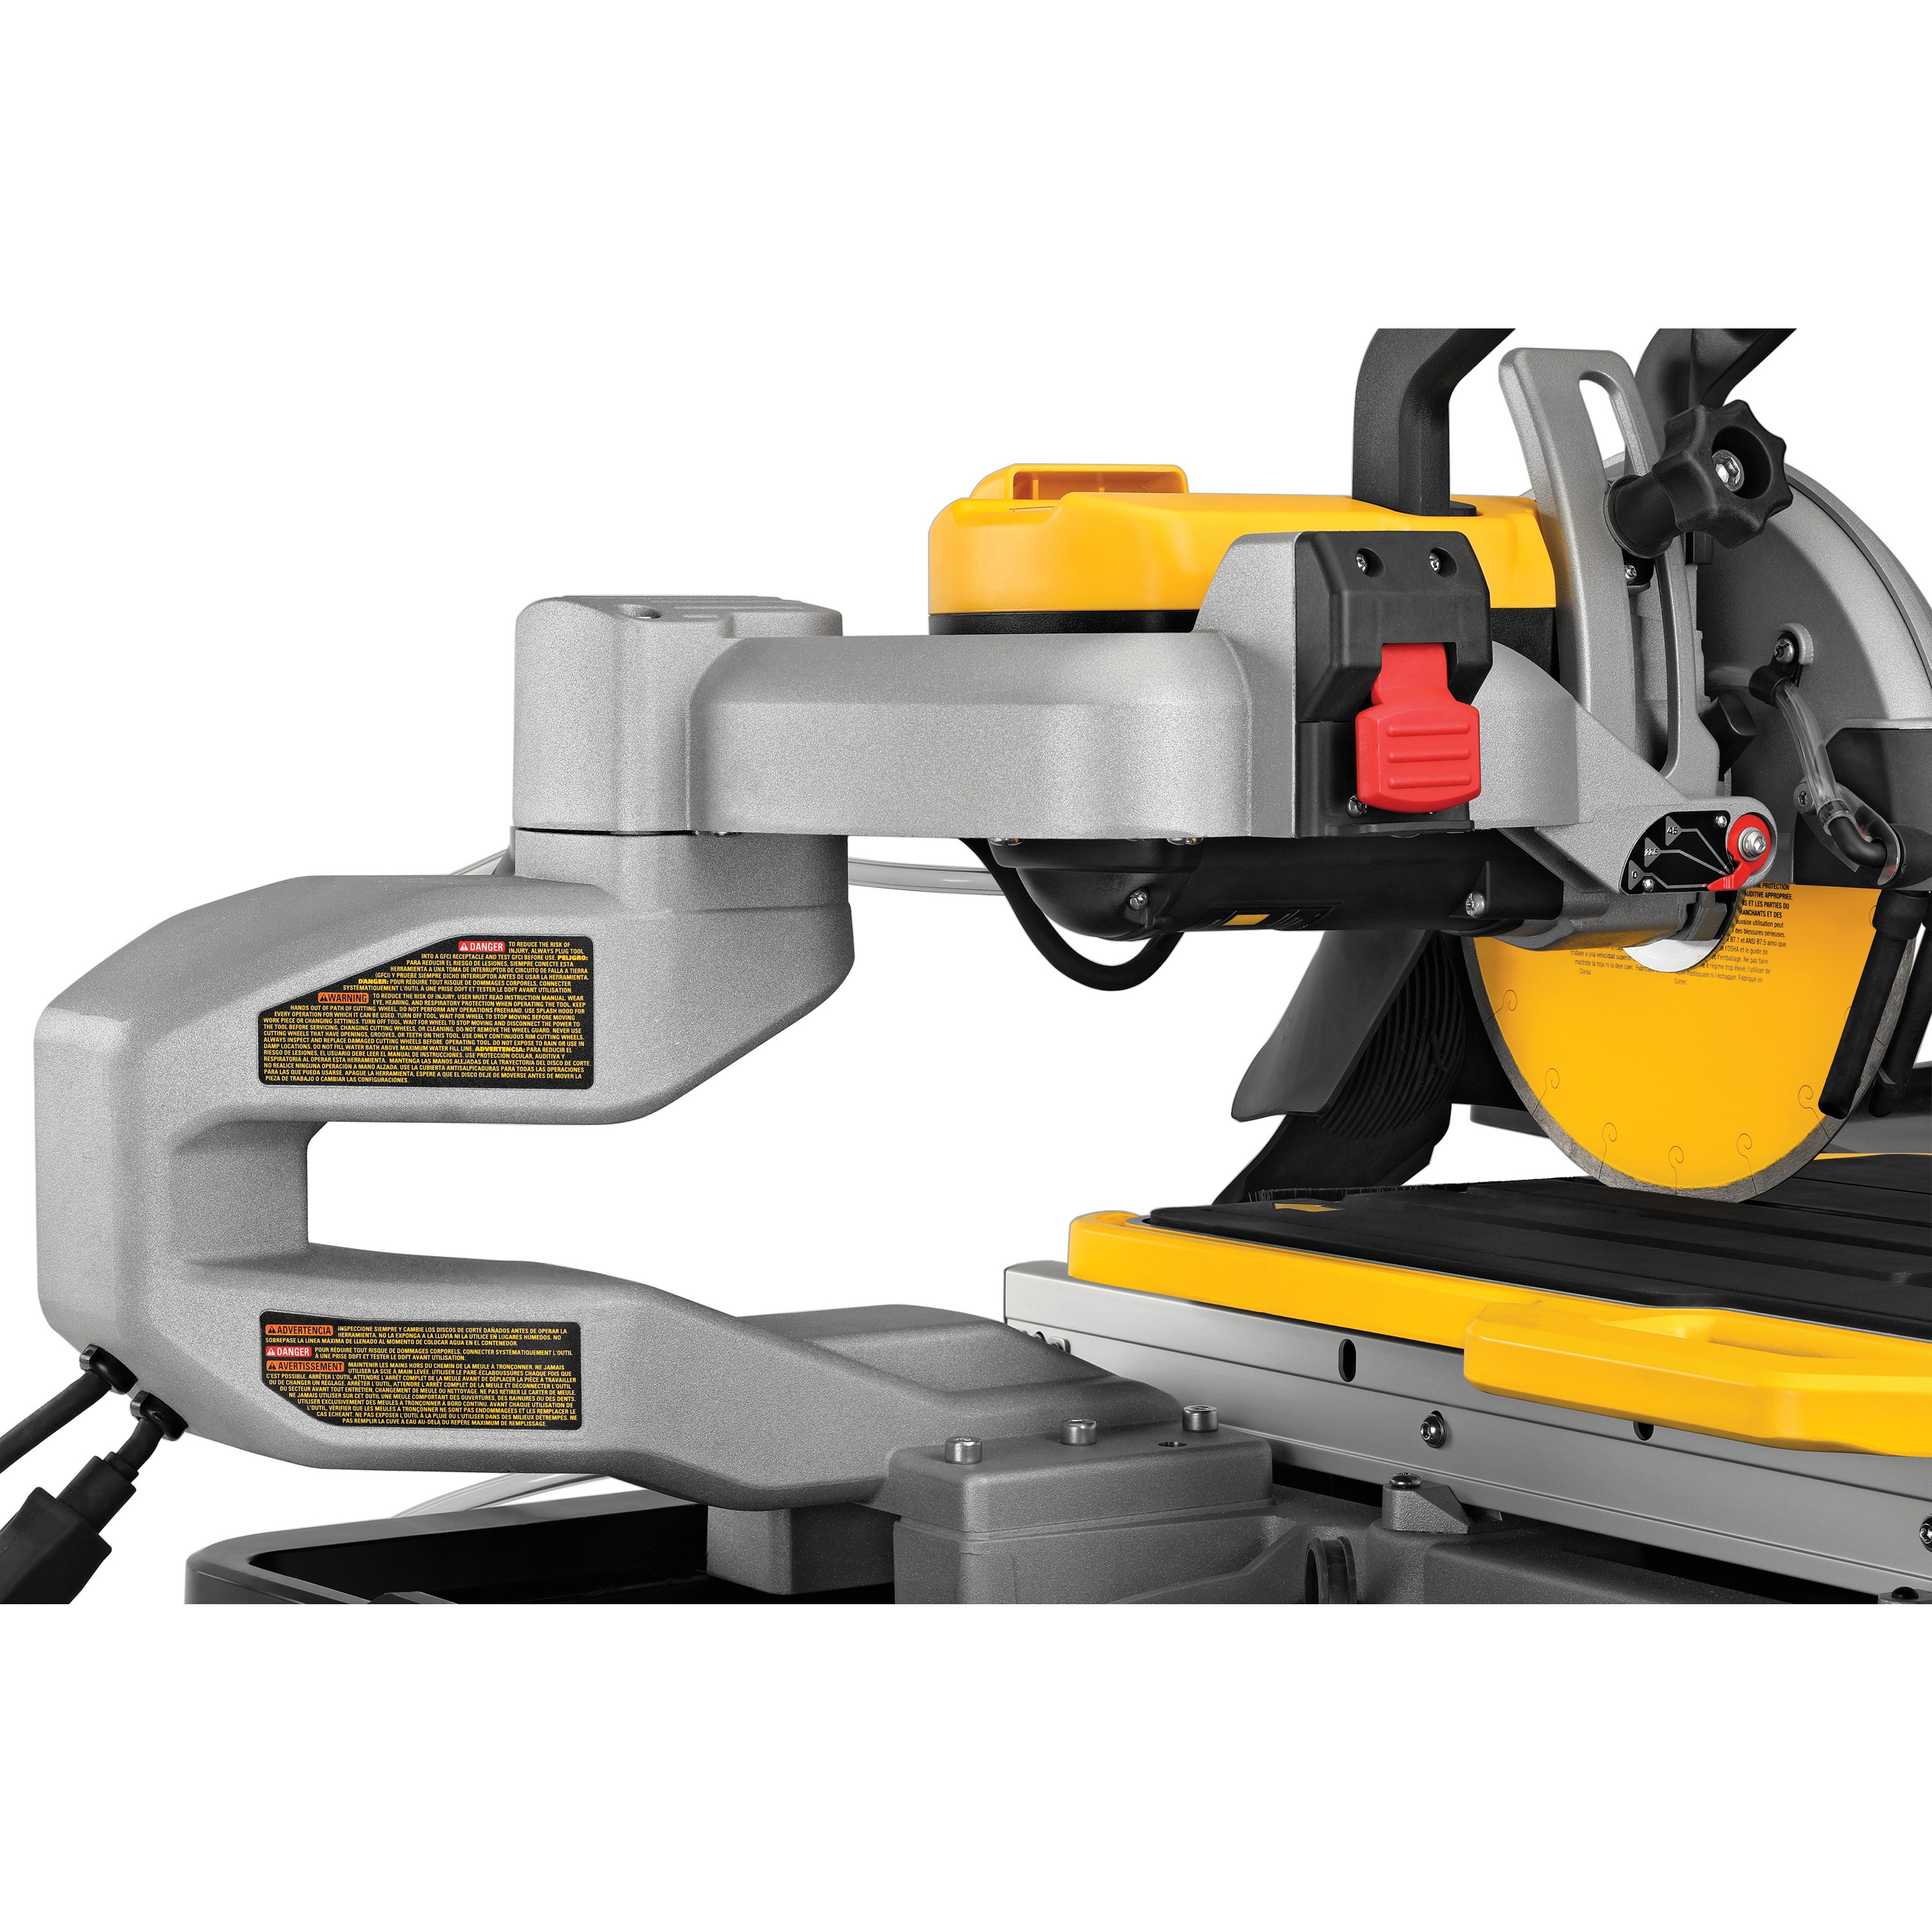 10 in. High Capacity Wet Tile Saw with Stand - D36000S | DEWALT